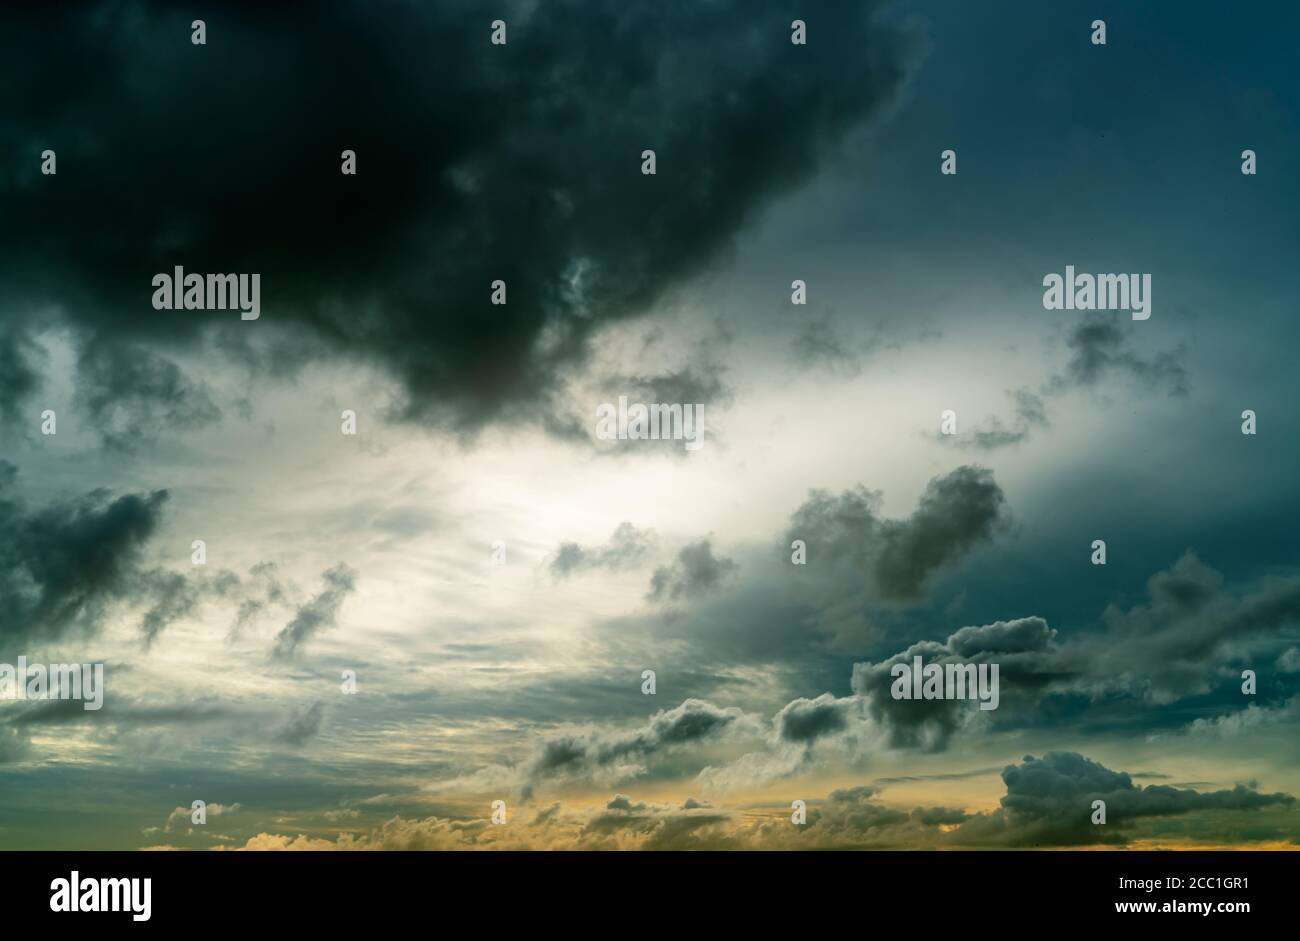 Sunset sky and gray and golden clouds. Gray sky and fluffy clouds. Thunder and storm sky. Sad and moody sky. Dead abstract background. Cloudscape. Stock Photo